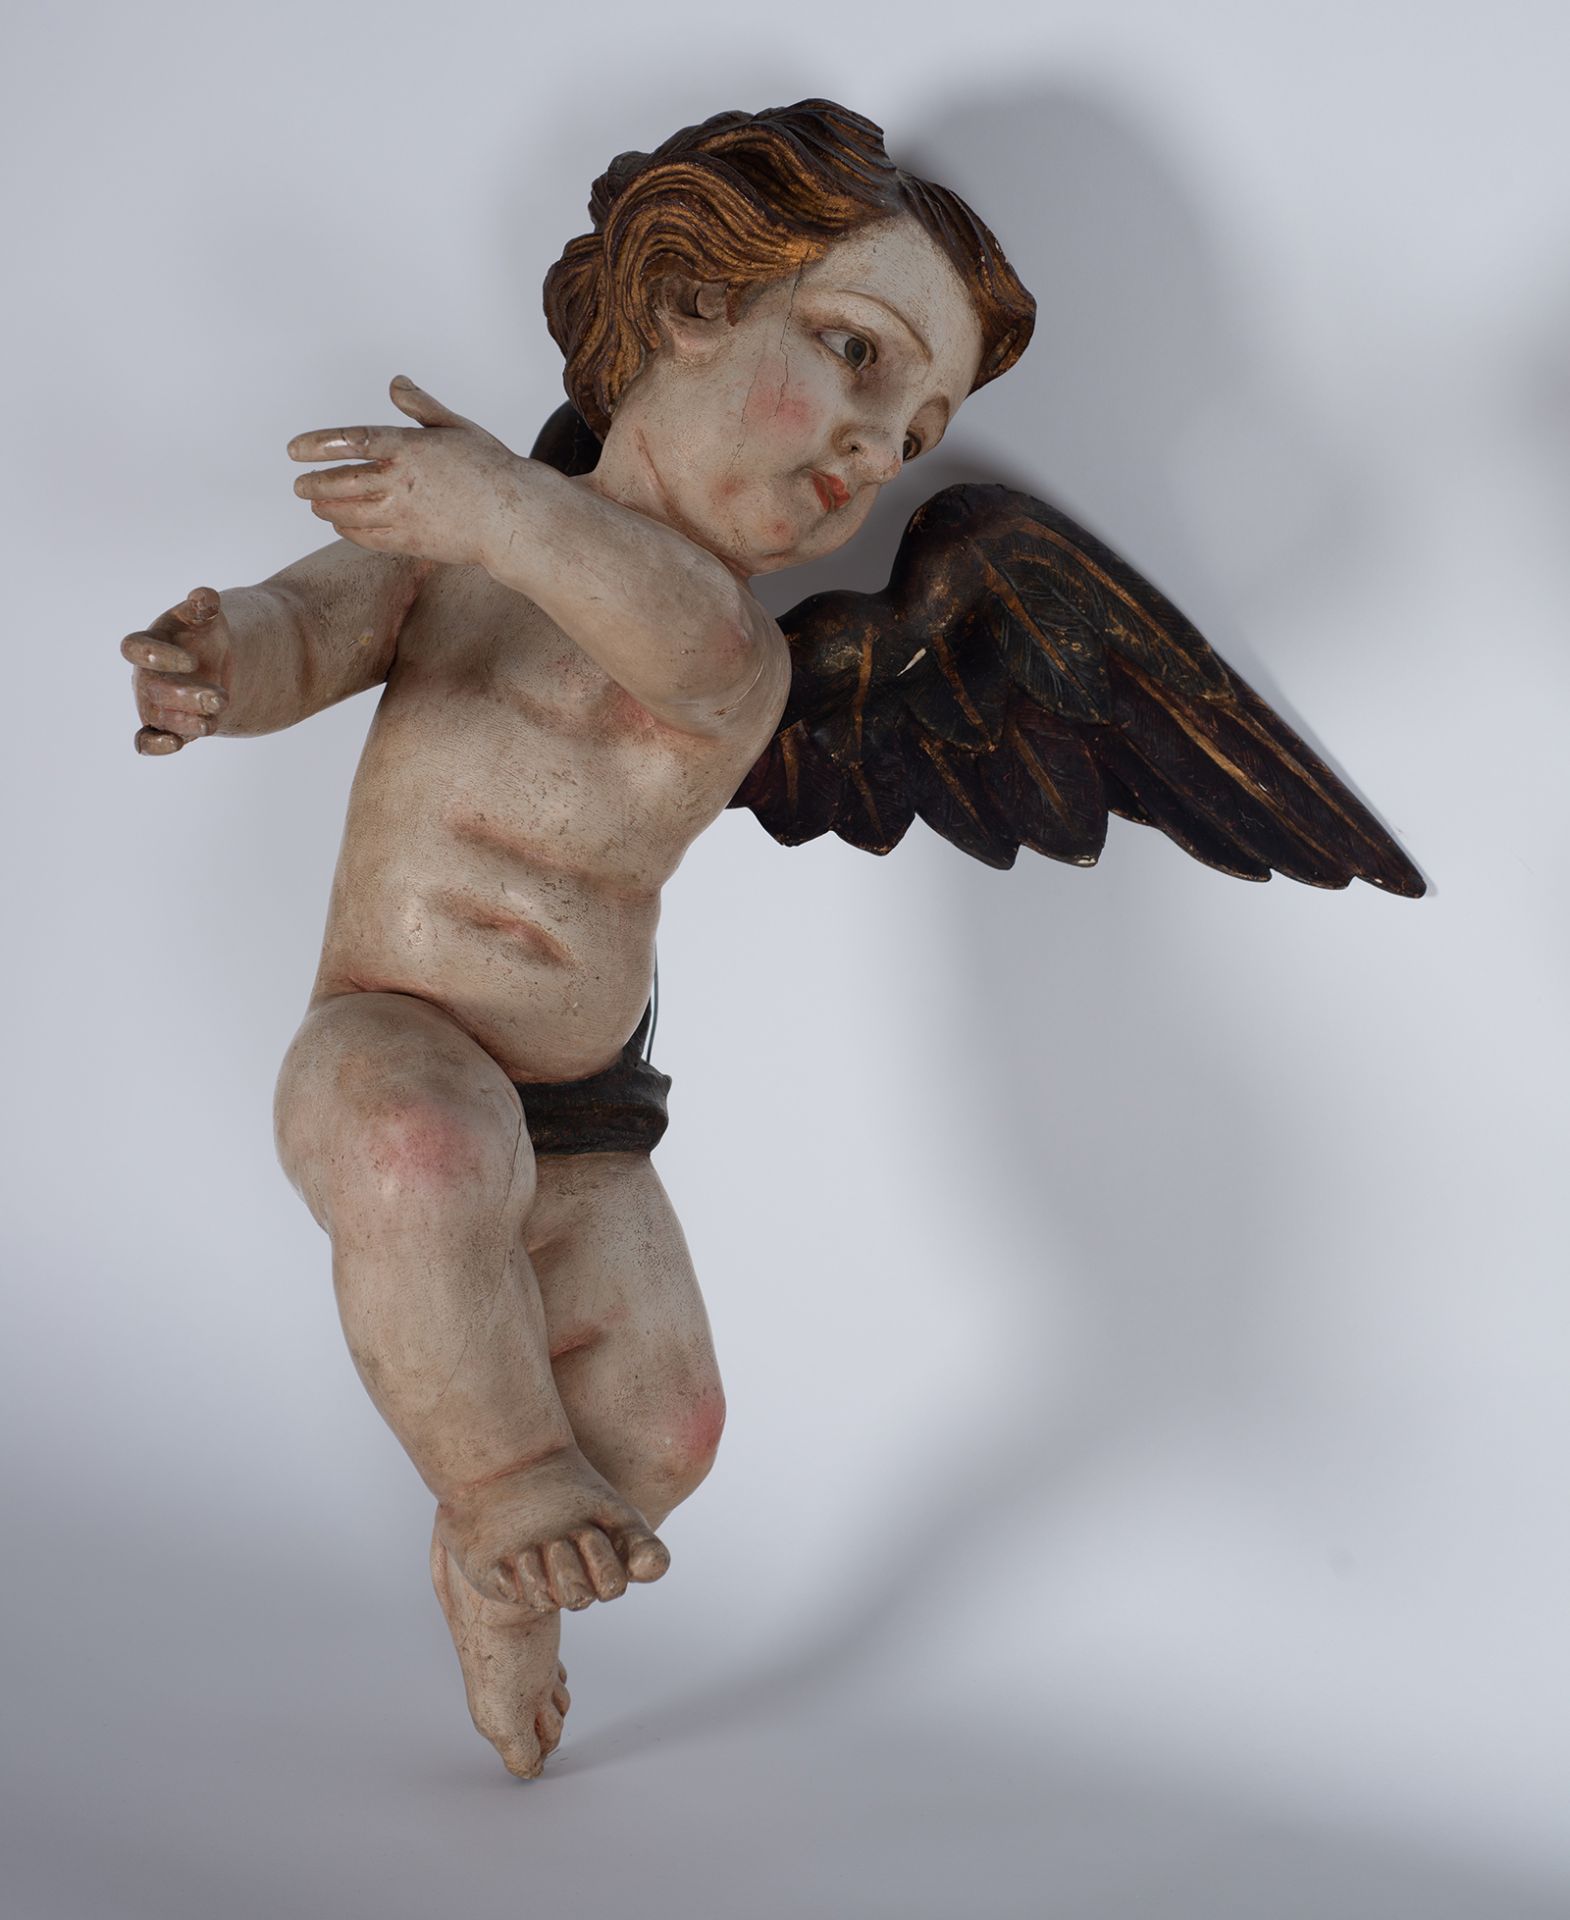 Large pair of wall angels, Spanish school of the 18th - 19th century - Image 2 of 4